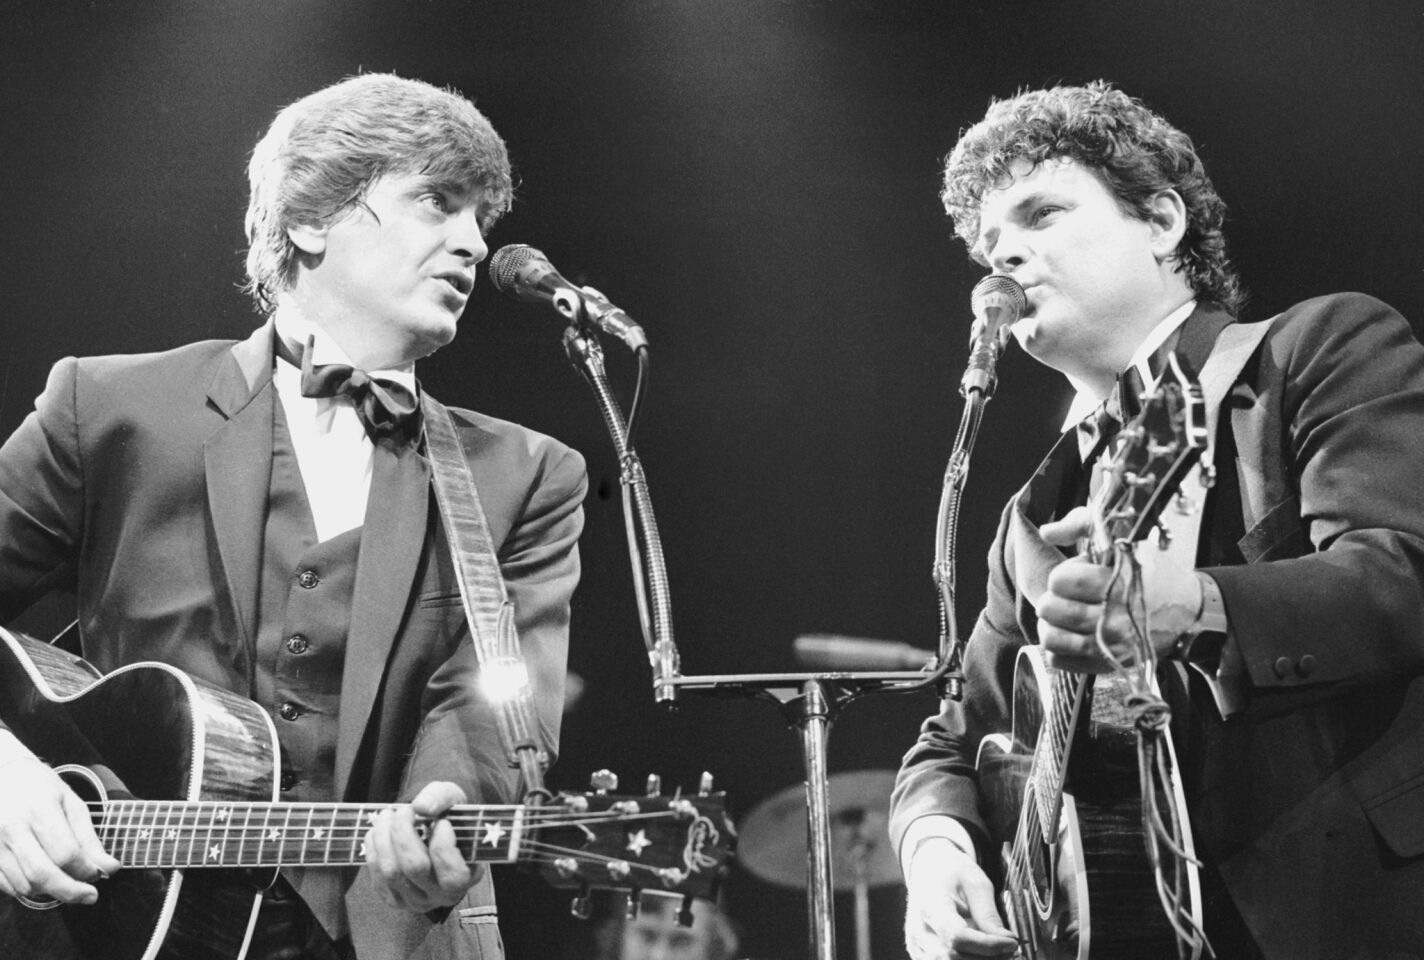 Phil Everly, left, shown with his brother, Don, made up a vocal duo that profoundly influenced the Beatles and the Beach Boys among others. Their hits included "Wake Up Little Susie," "Bye Bye Love" and "When Will I Be Loved." He was 74.